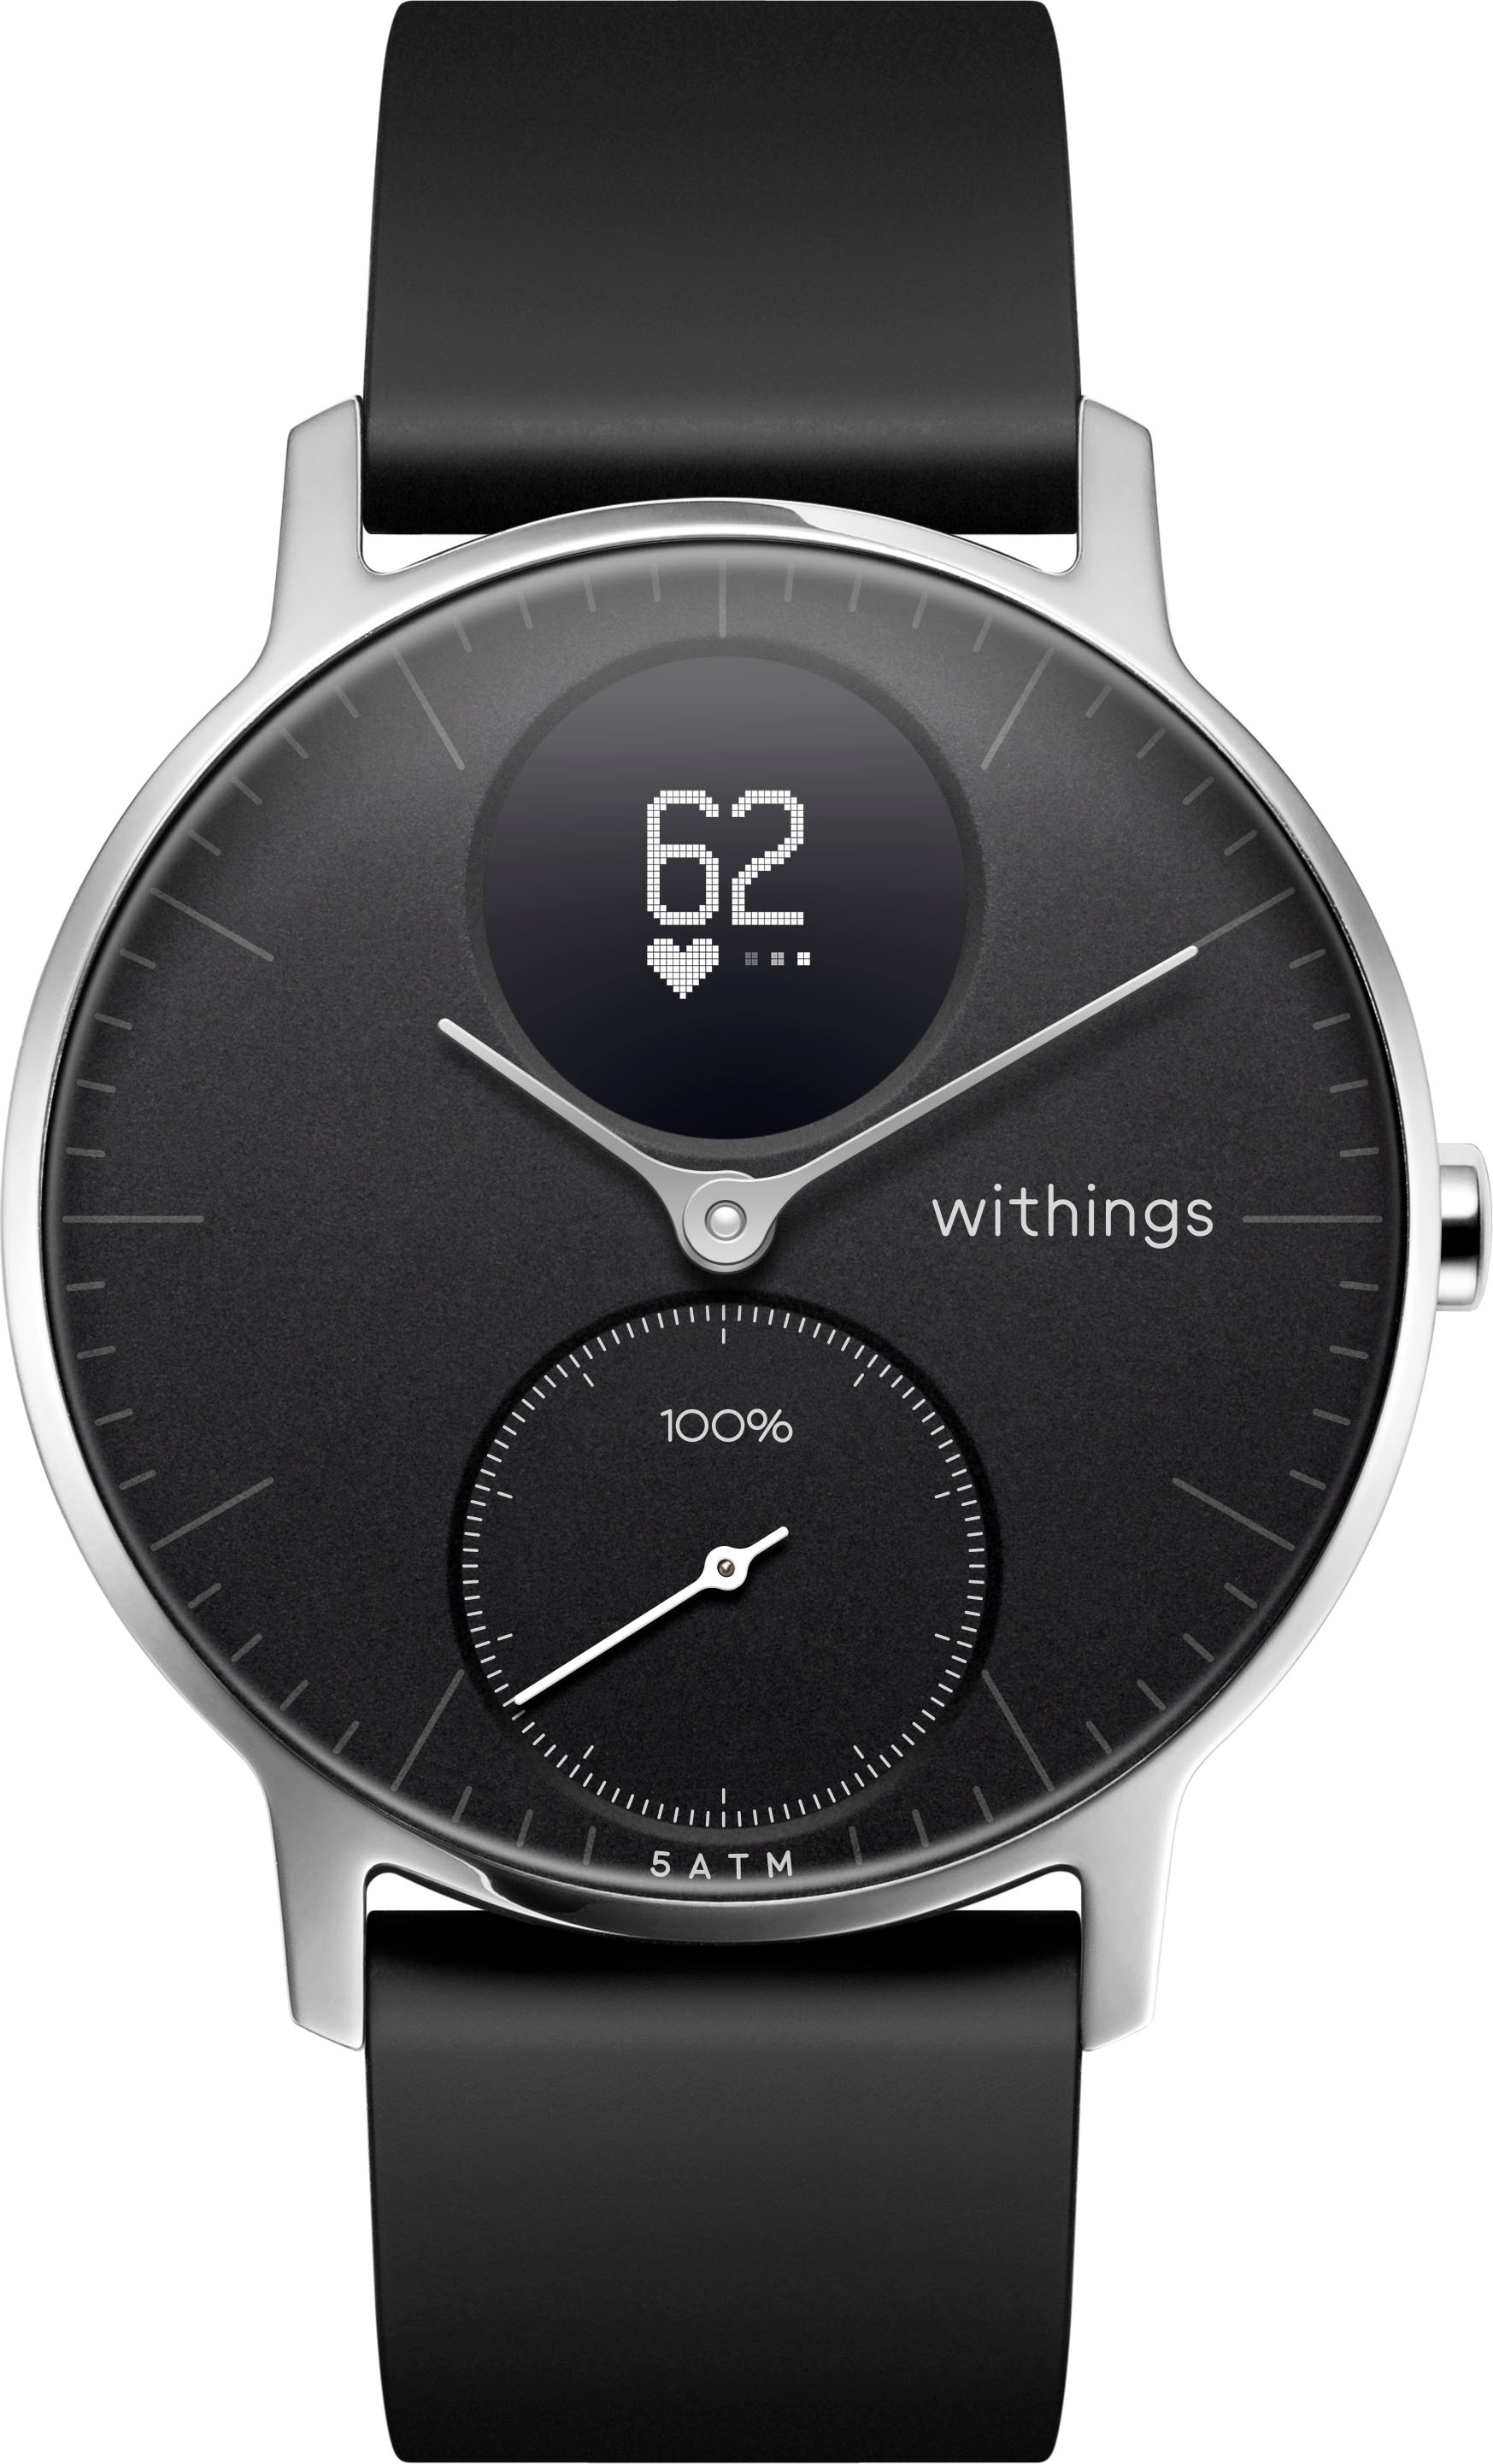 Fitnessuhr Withings STEEL mm)« (36 HR »Activité